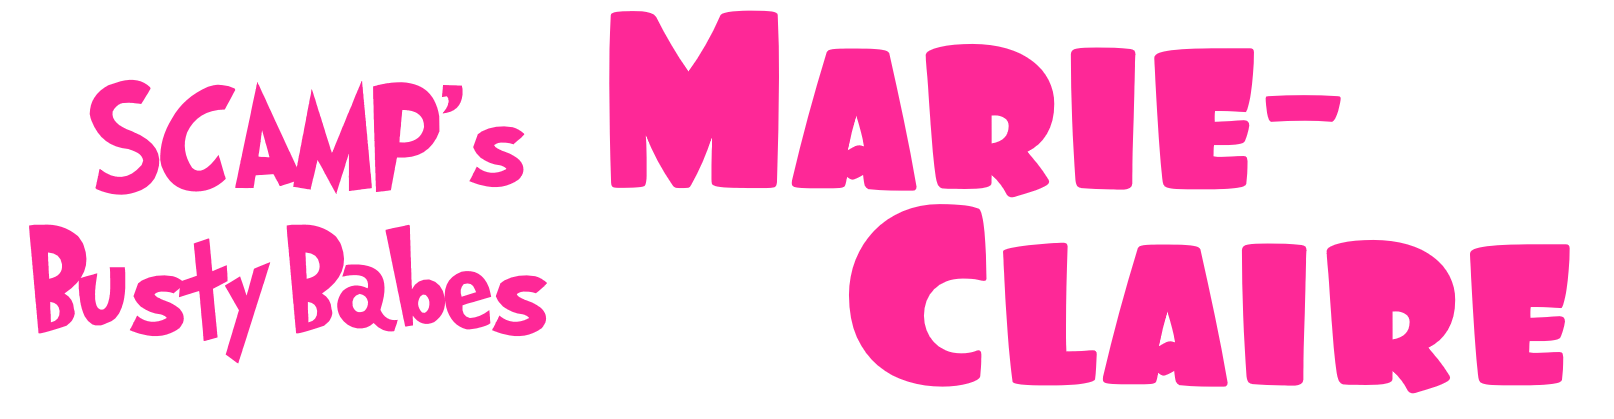 MarieClaireHEADER.png